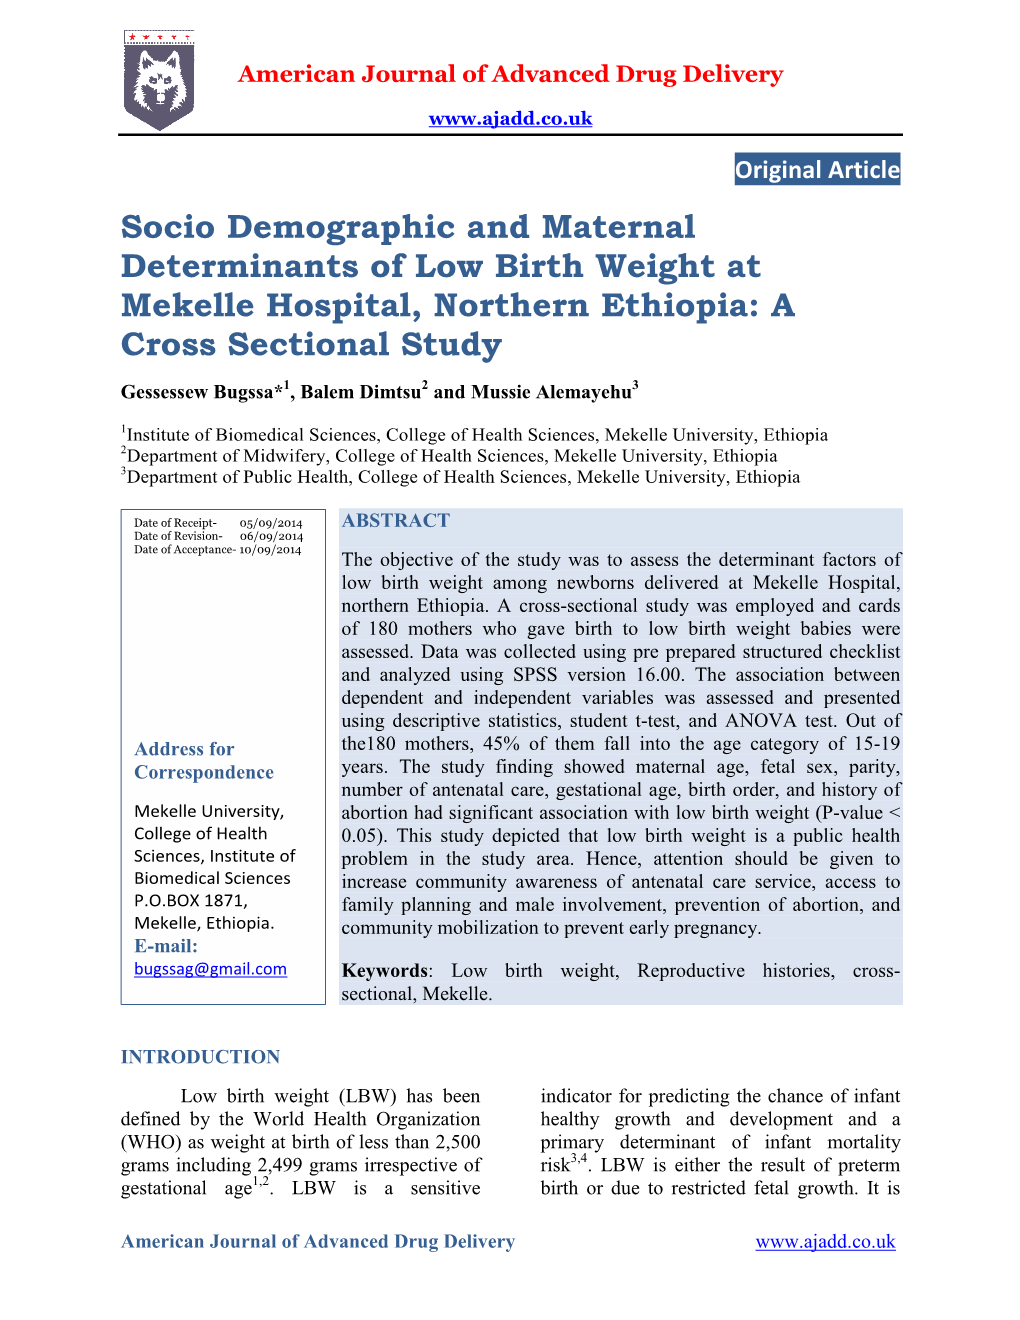 Socio Demographic and Maternal Determinants of Low Birth Weight At